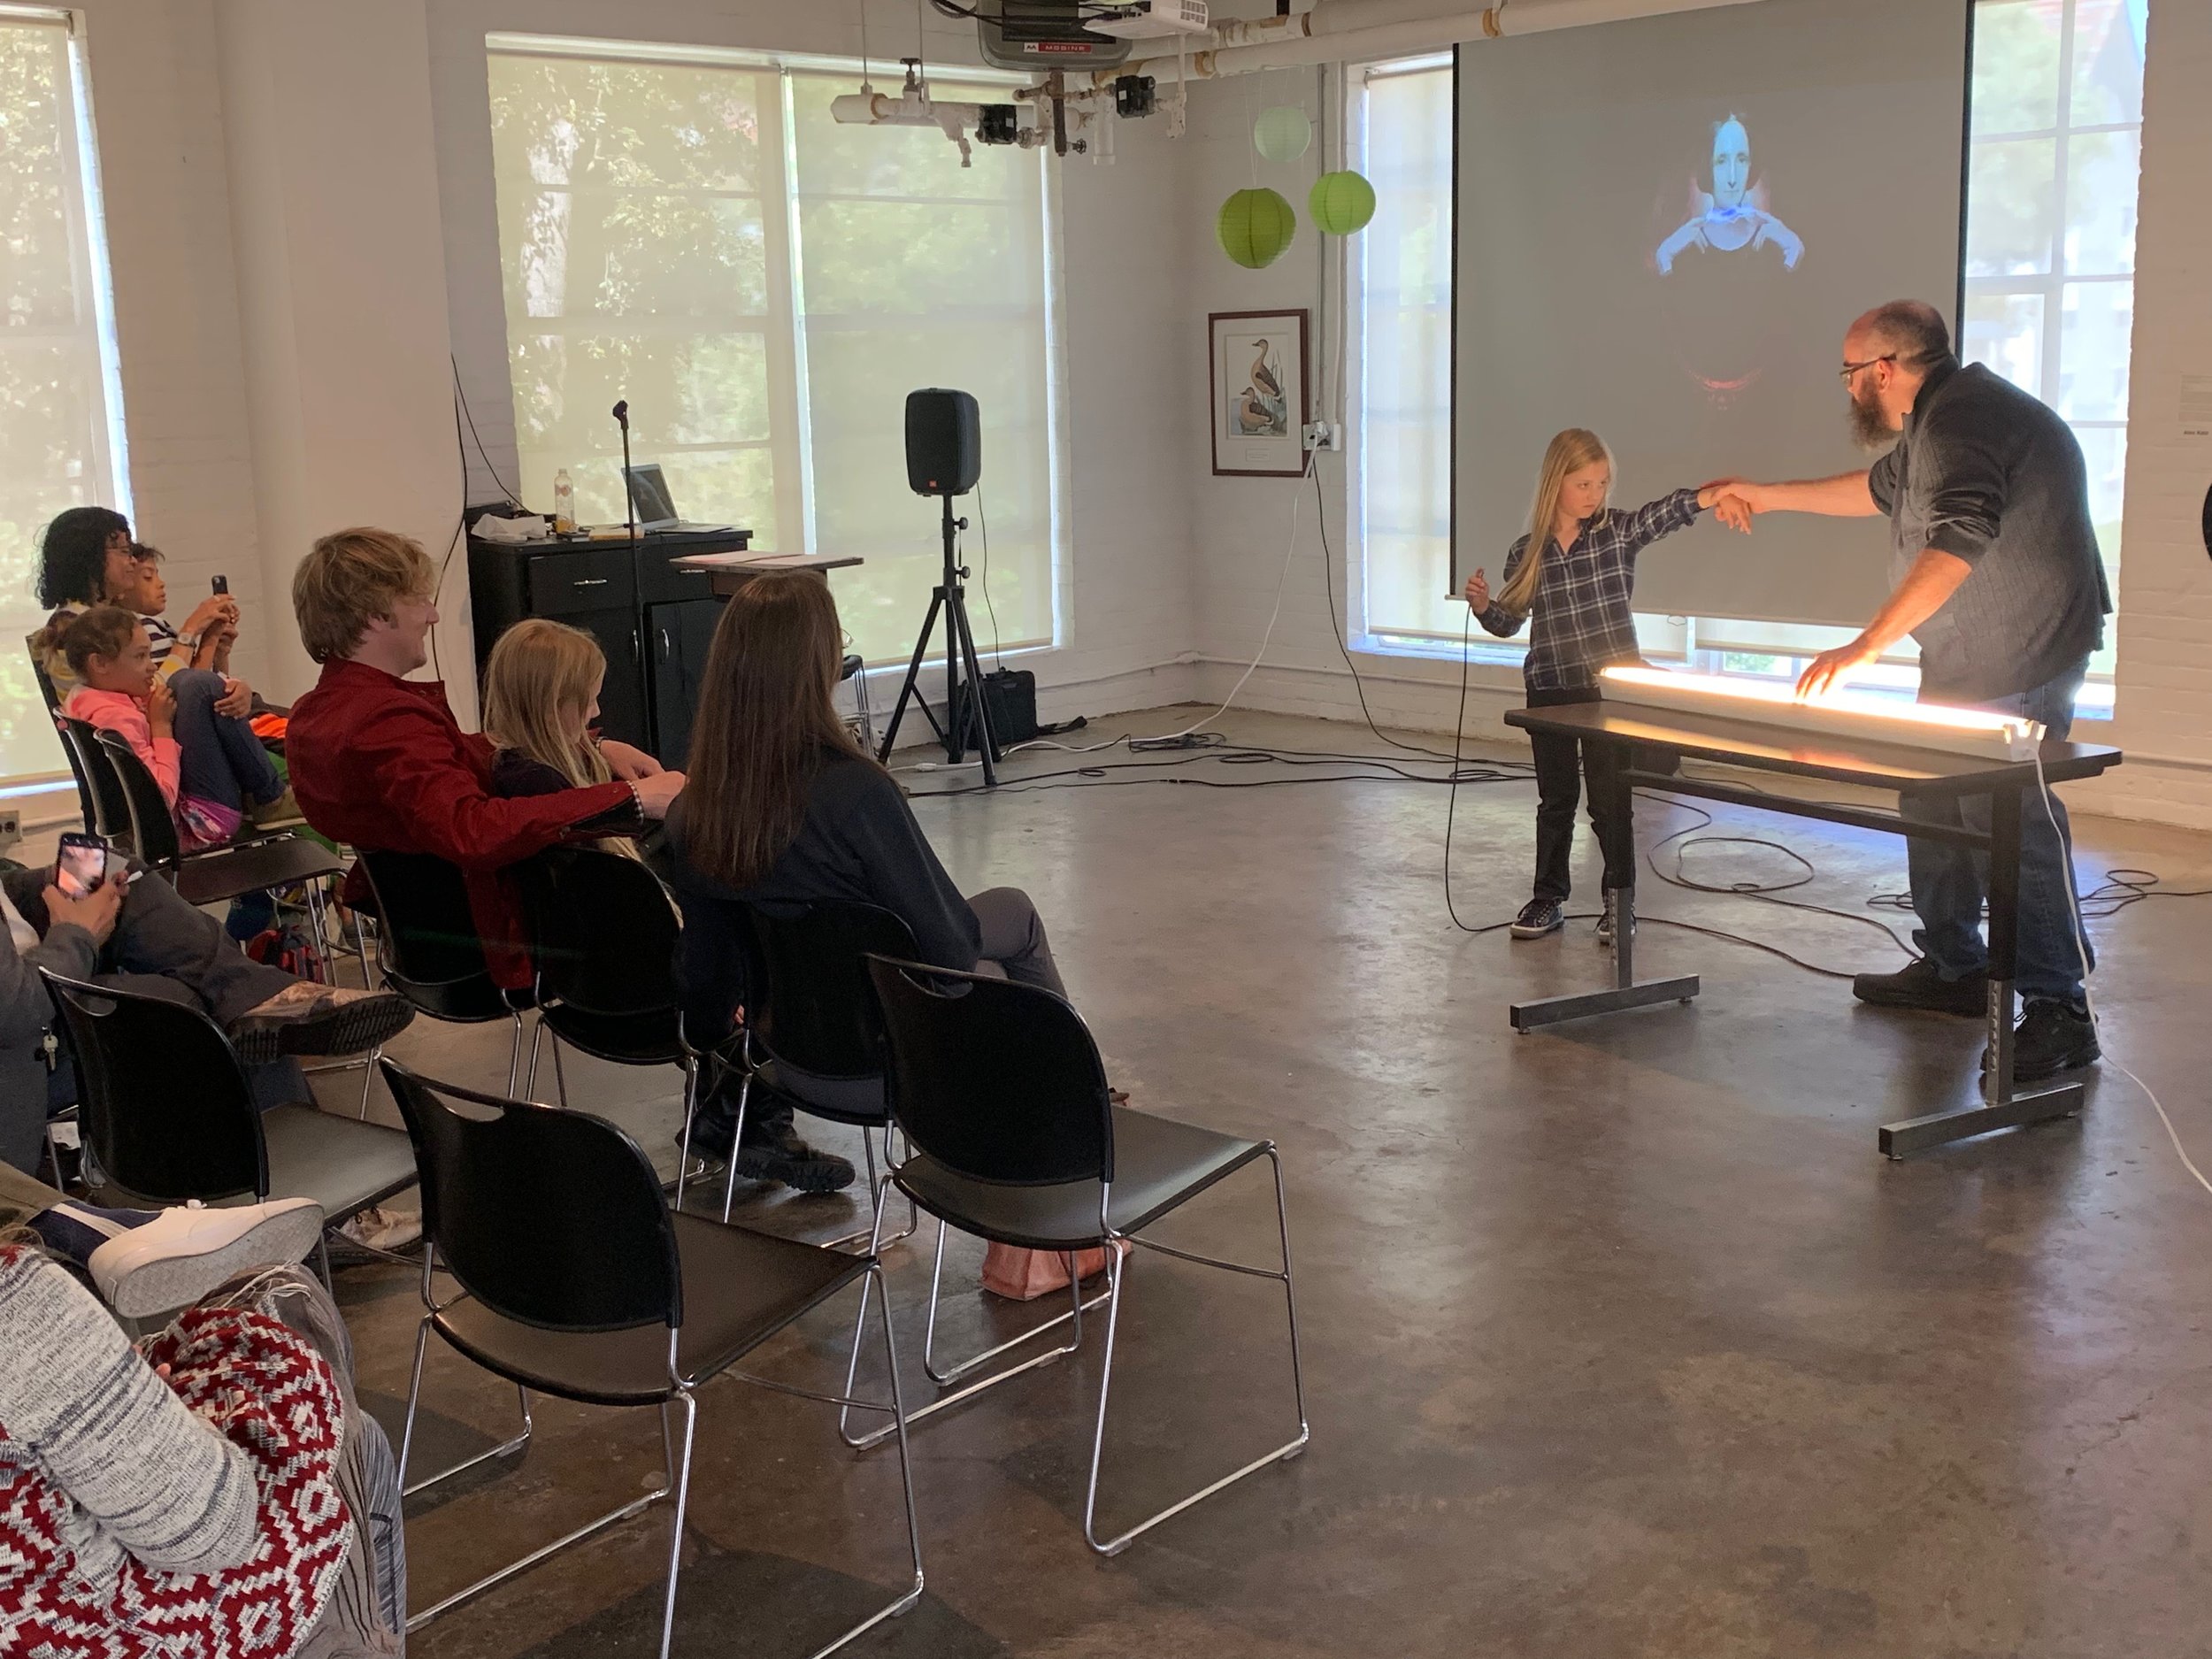  Artist Matthew Weedman and an audience member demonstrate how to turn a light bulb into a musical instrument at Weedman’s performance “It’s Alive!” in the Grabhorn Institute gallery, Summer 2019. 